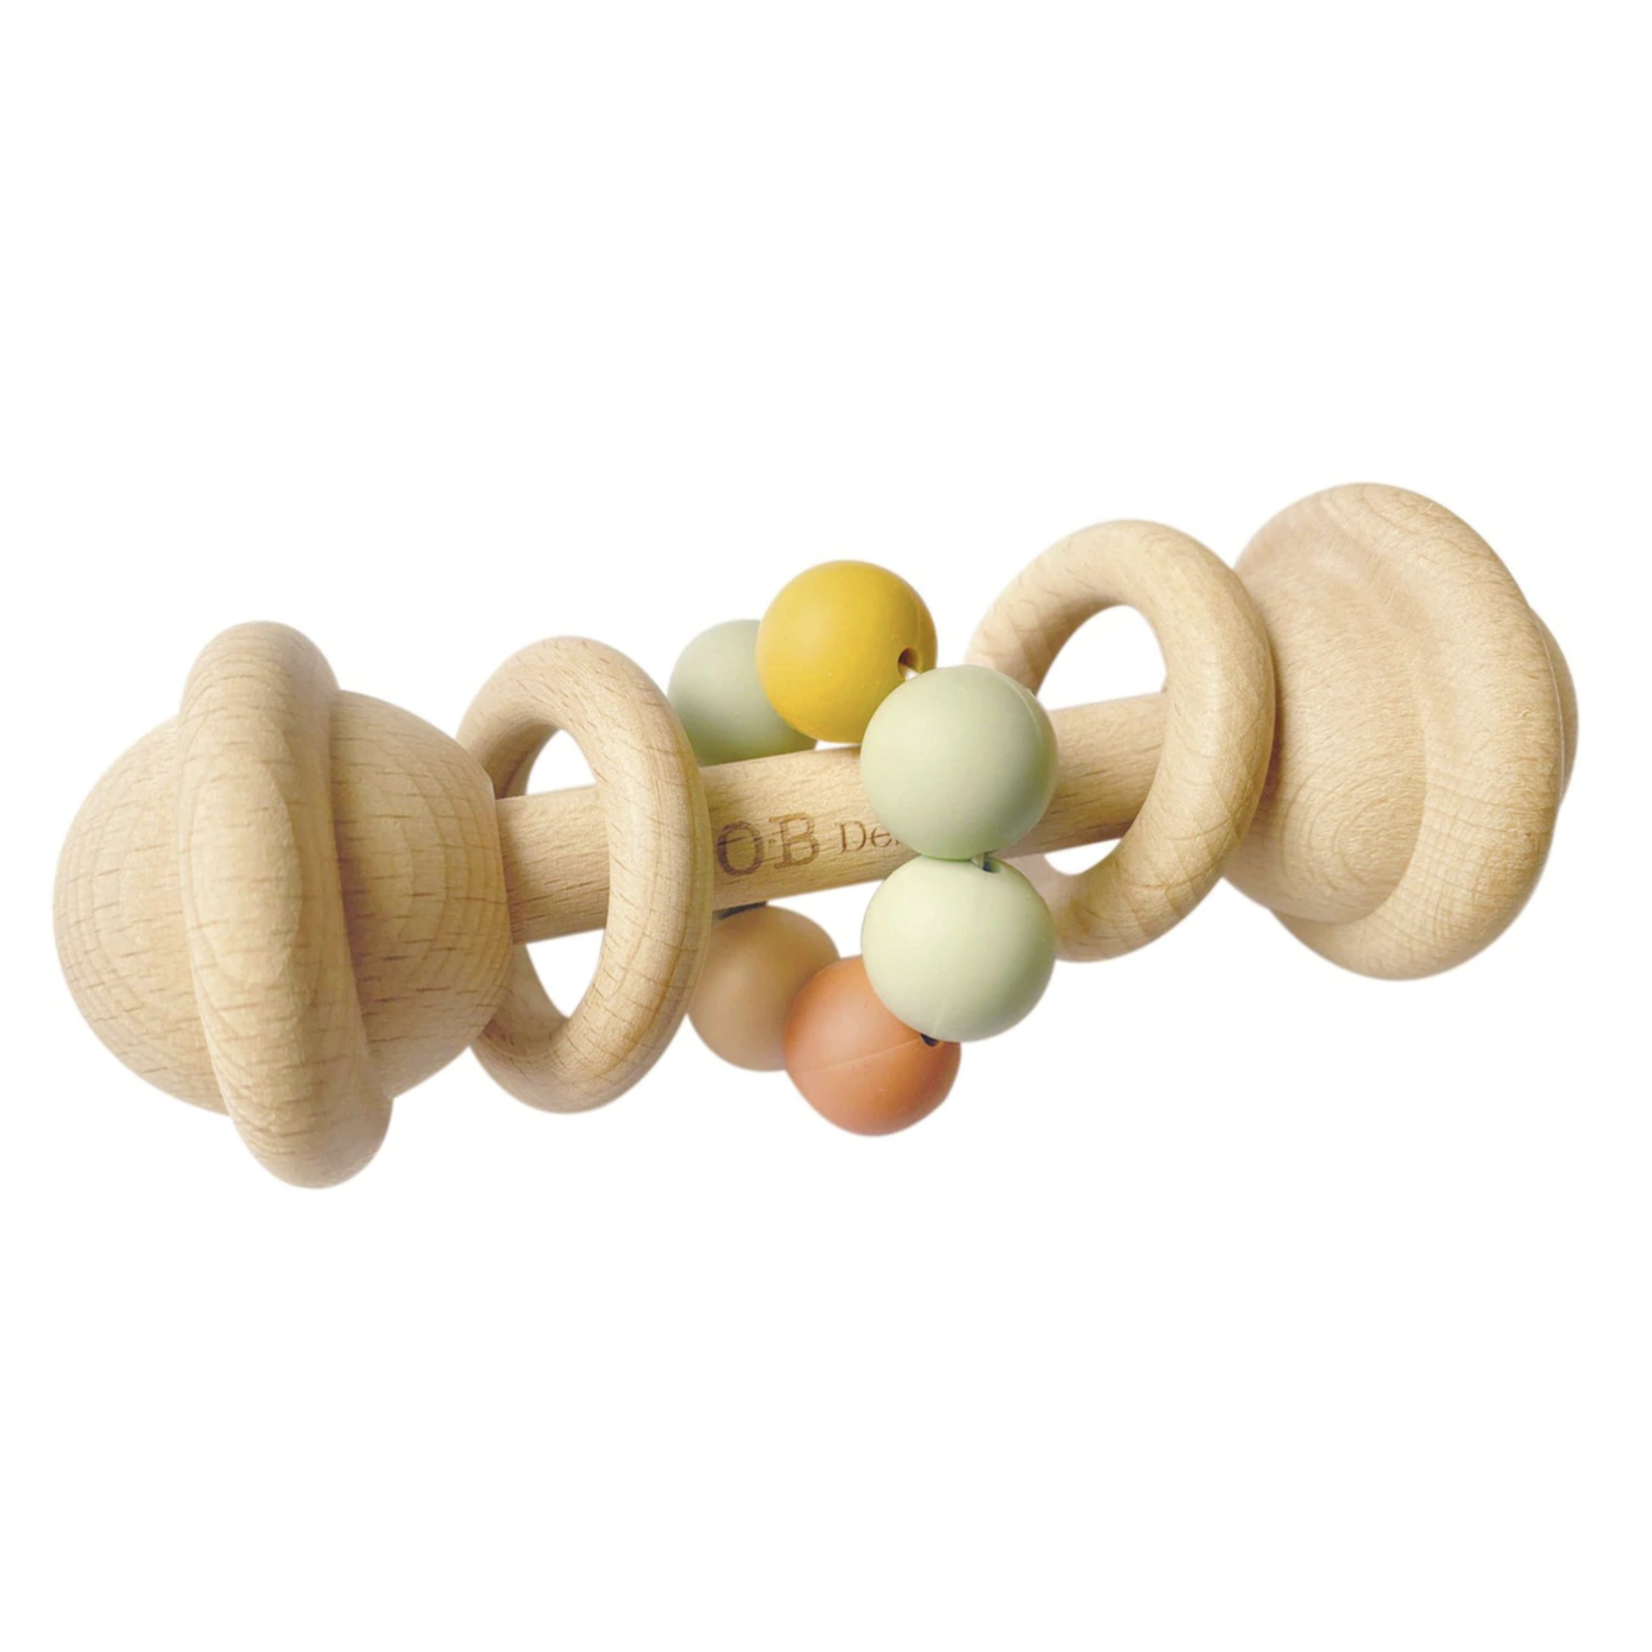 OB Designs Eco-Friendly Rattle|Organic Beechwood Silicone Toy-Multi-color